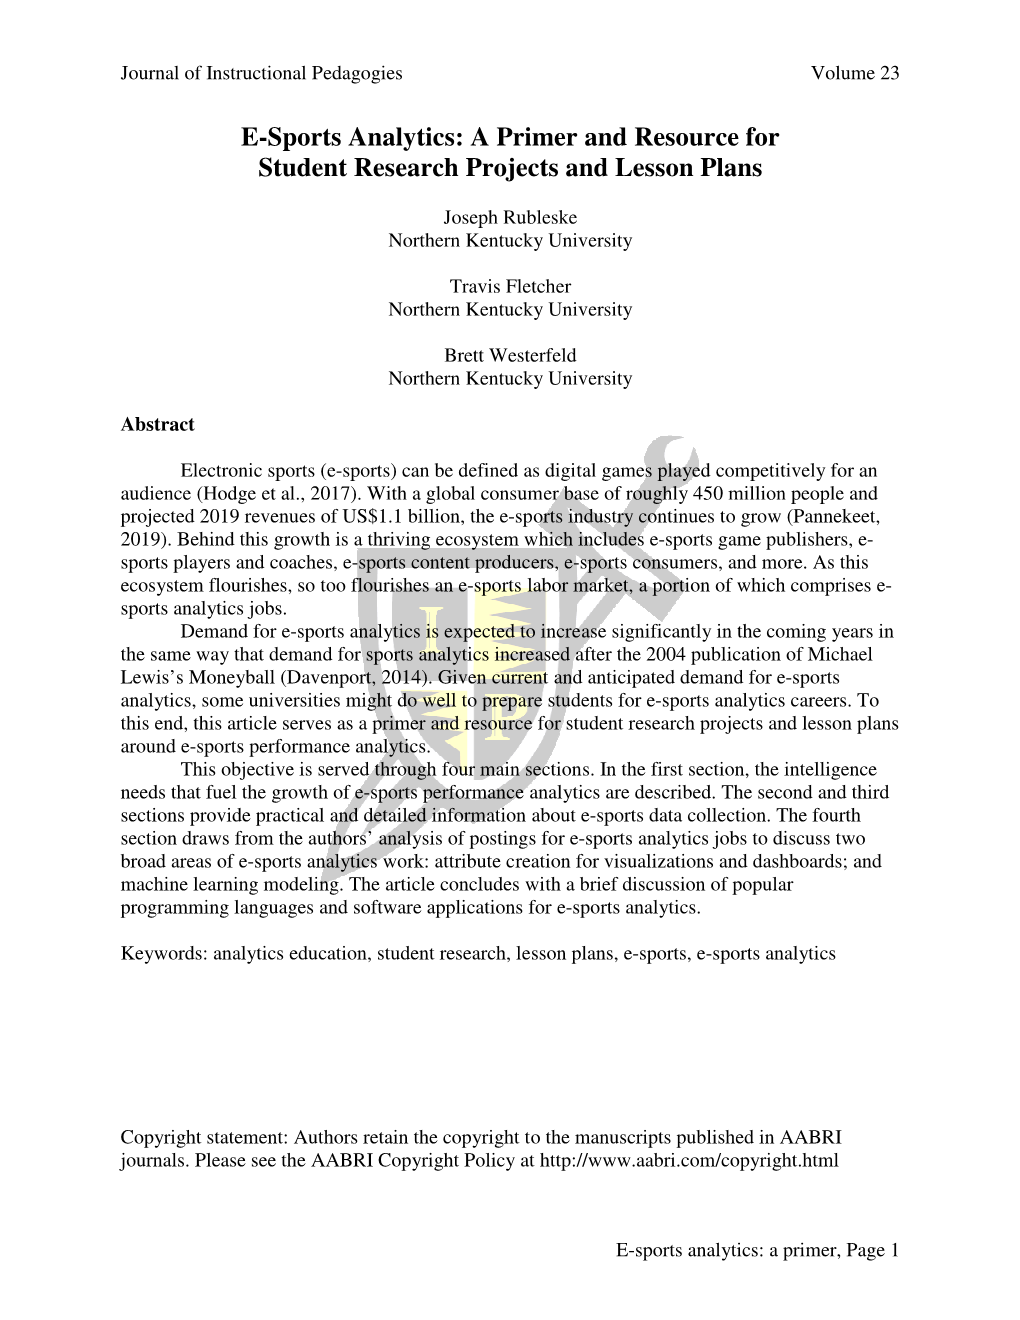 E-Sports Analytics: a Primer and Resource for Student Research Projects and Lesson Plans